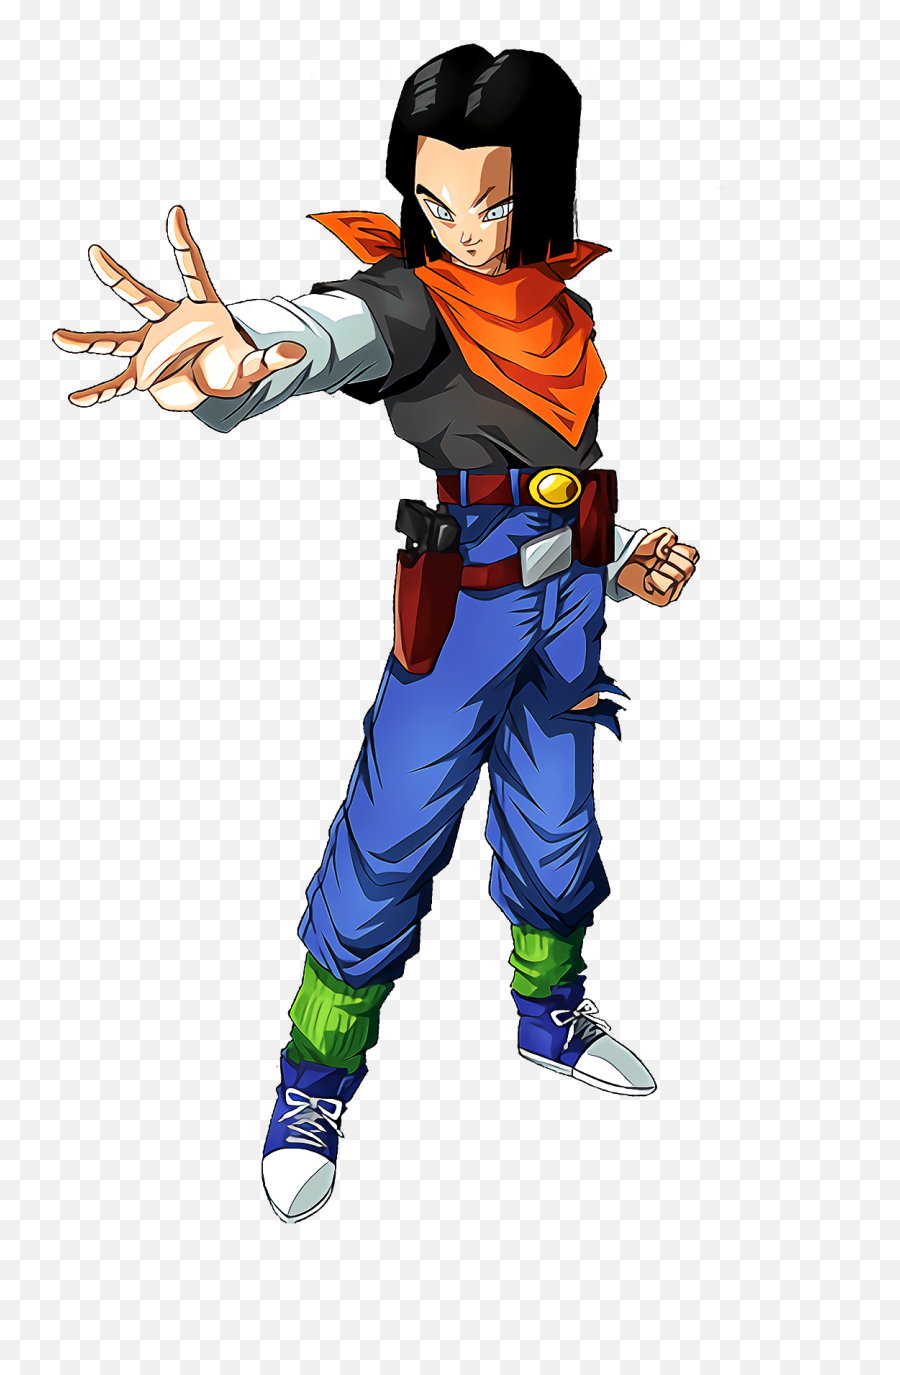 Technologies Hellfighter Android - Super Android 17 Gt Render Emoji,Dragon Ball Z Emoji Android